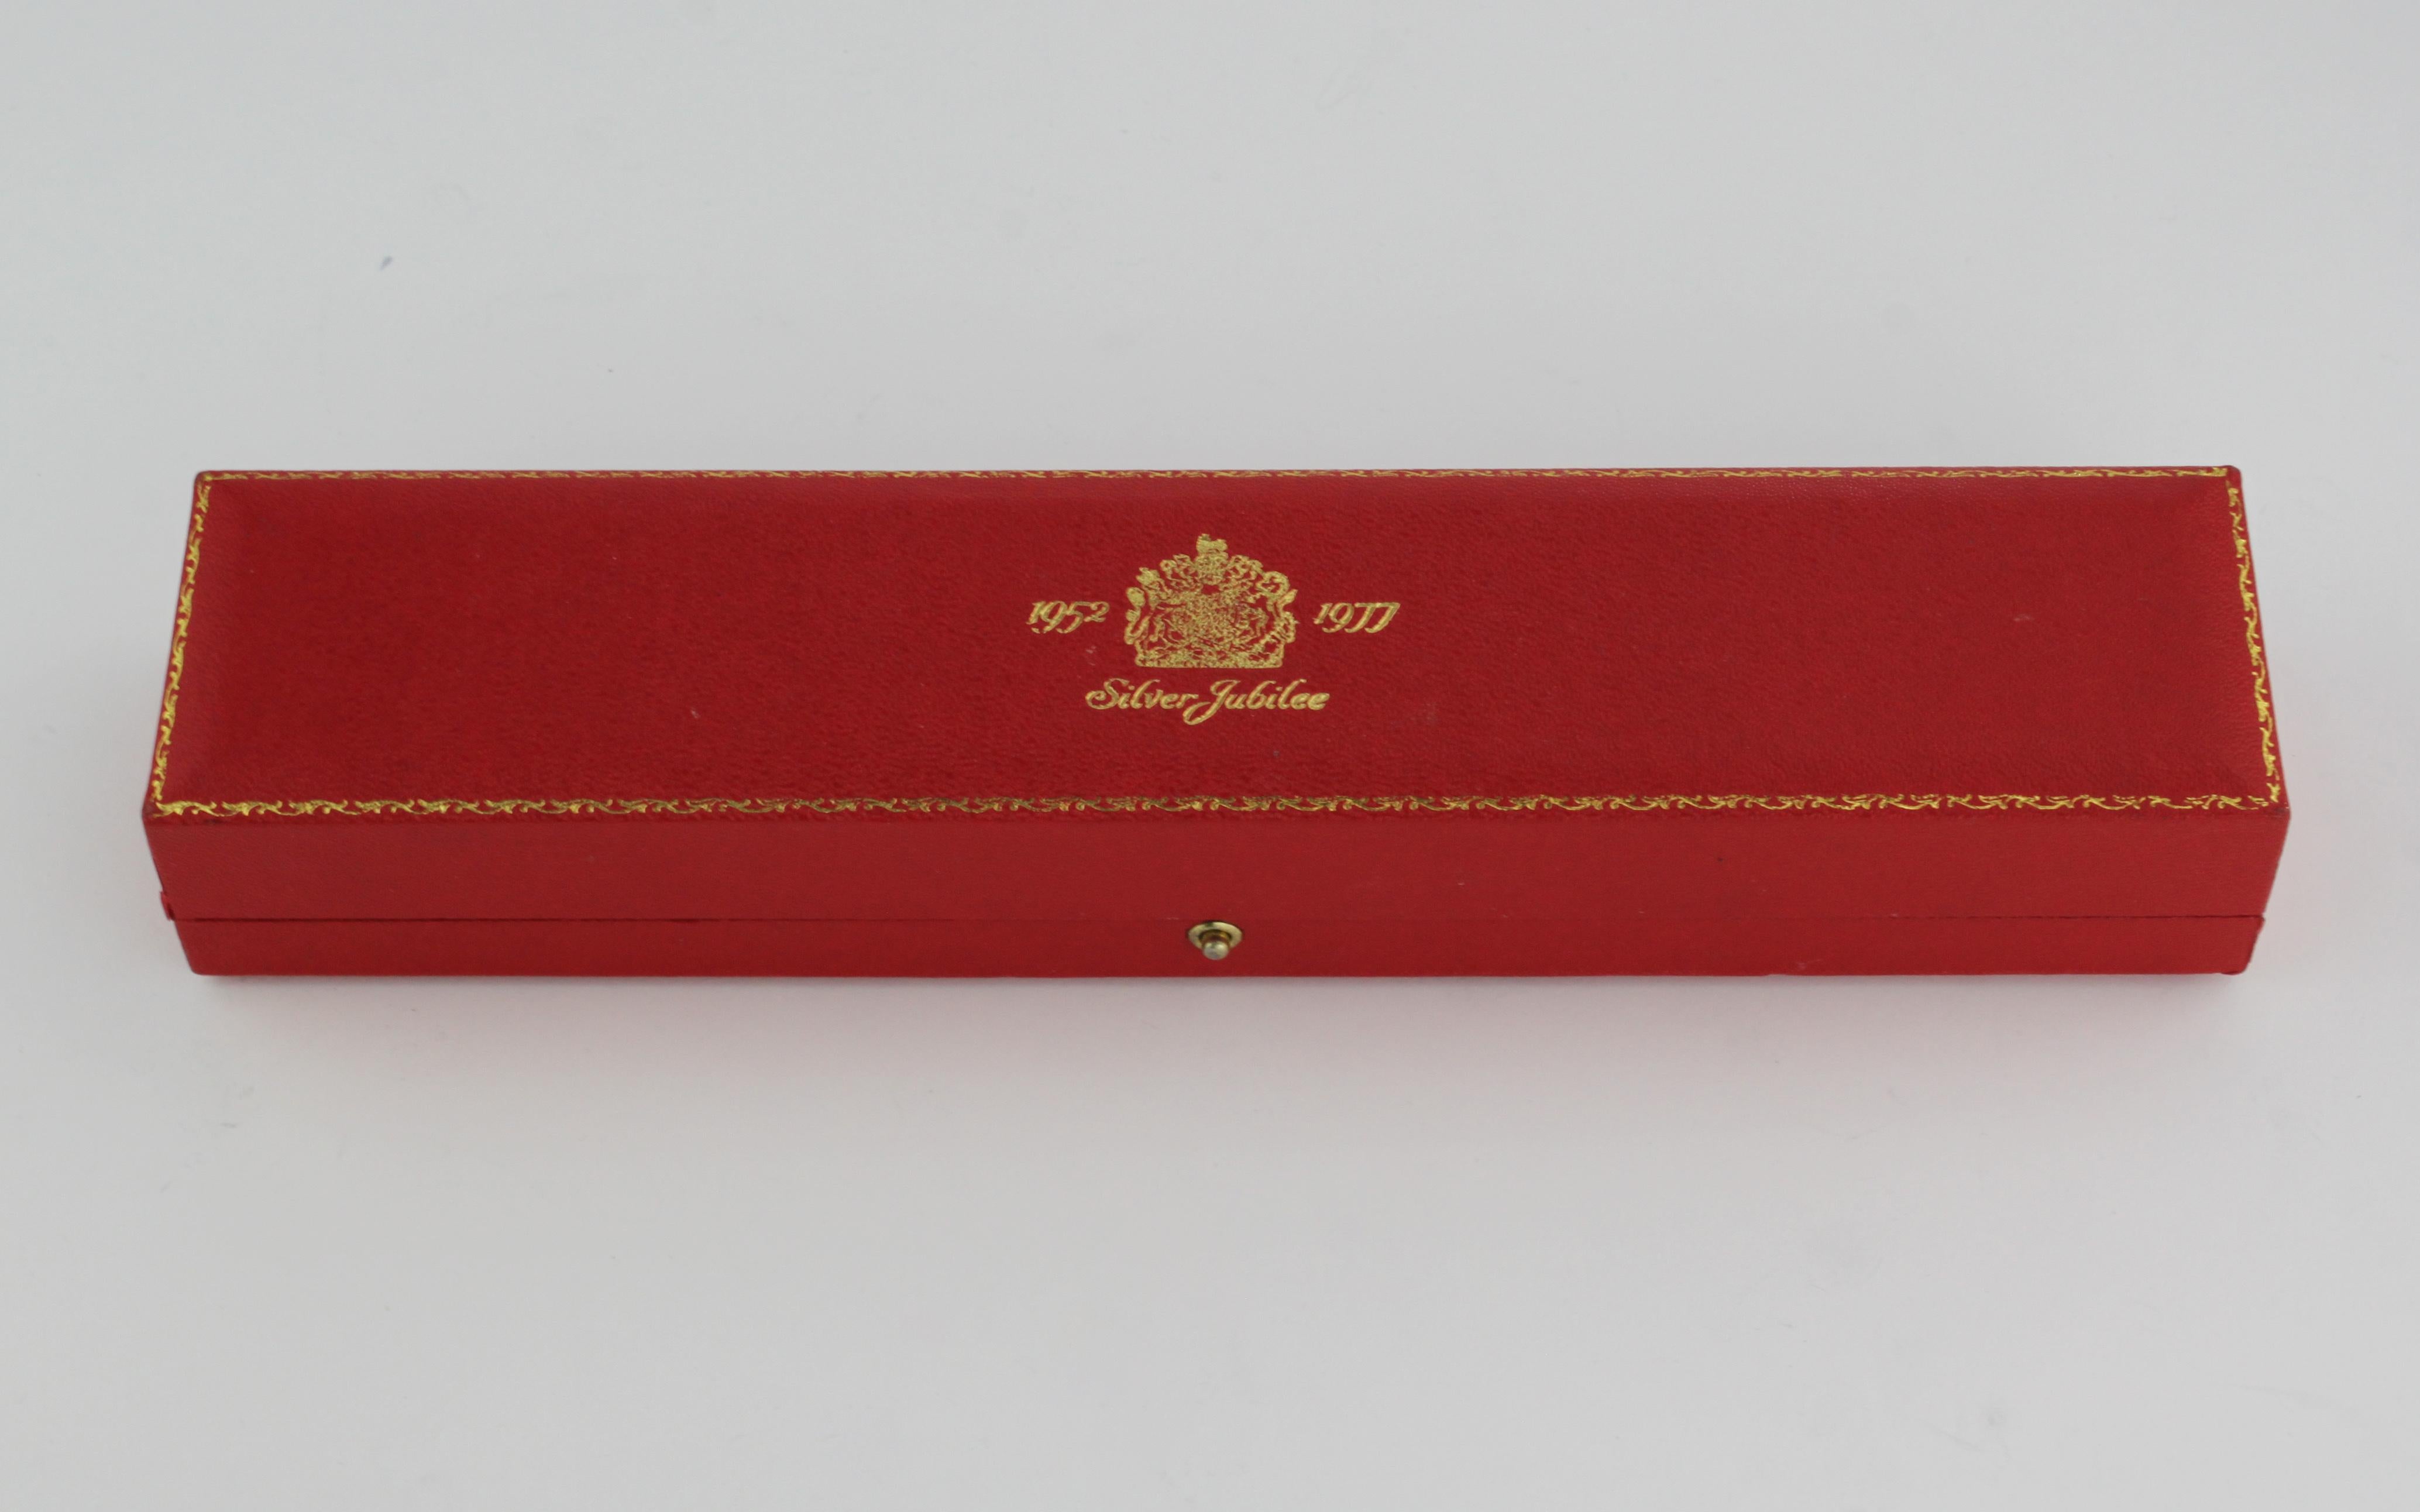 Late 20th Century Vintage English Silver Paper Knife Made for the Queen's Silver Jubilee in 1977